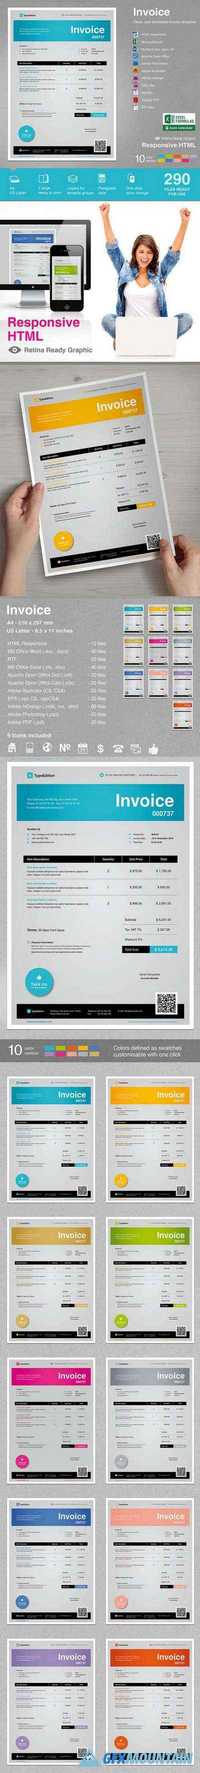 Invoice Stationery Template 407743